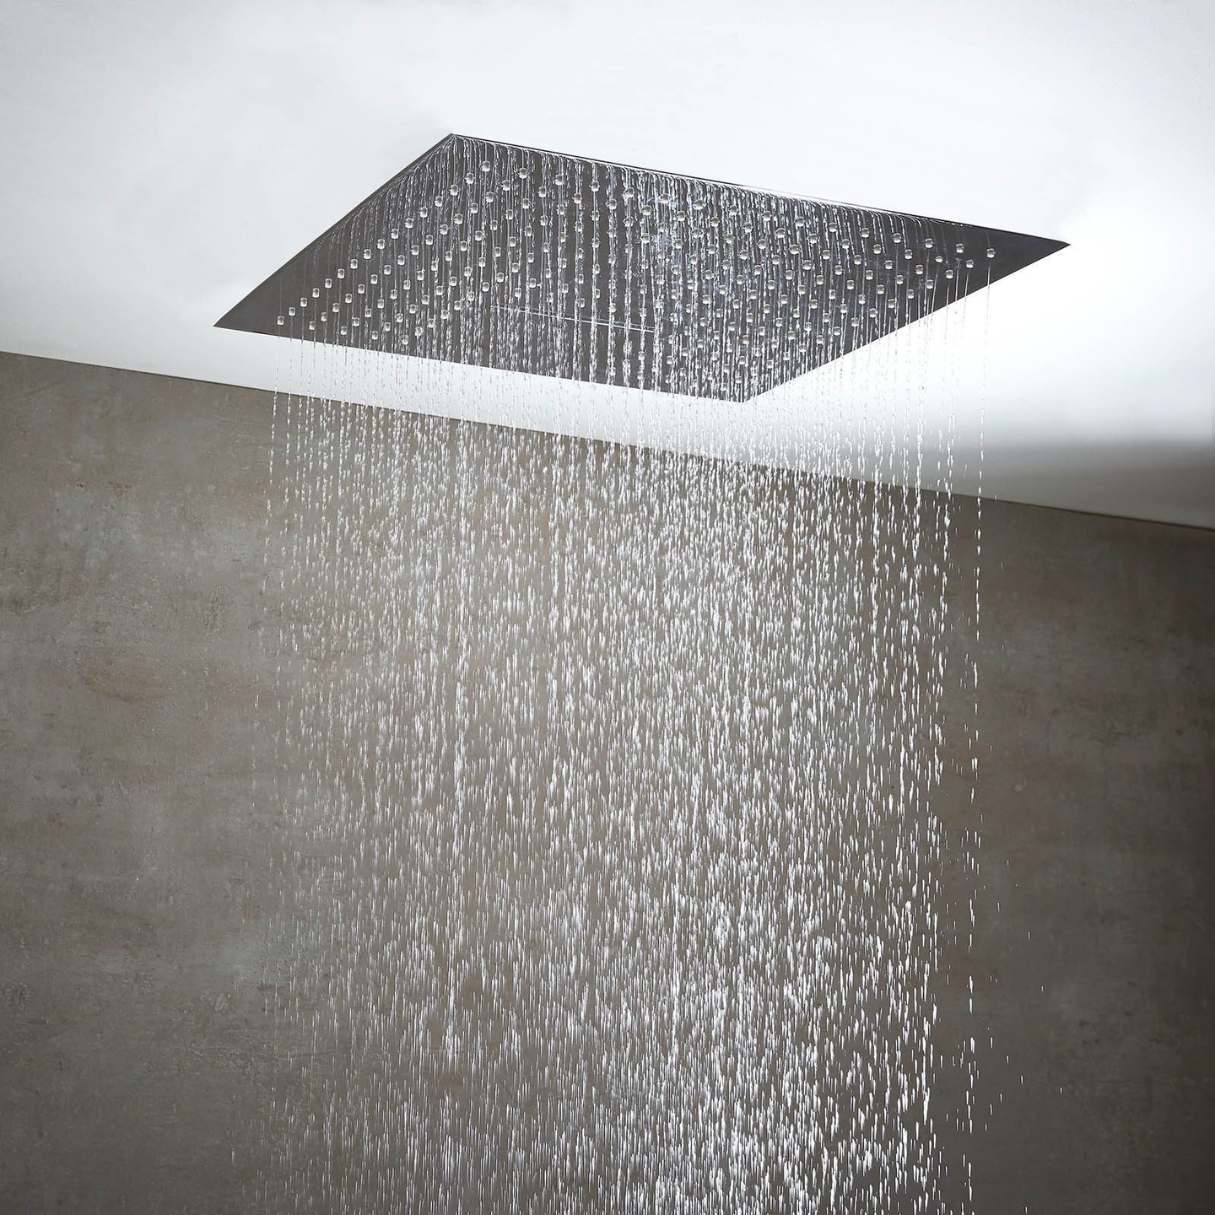 How To Install A Rain Shower Head In The Ceiling